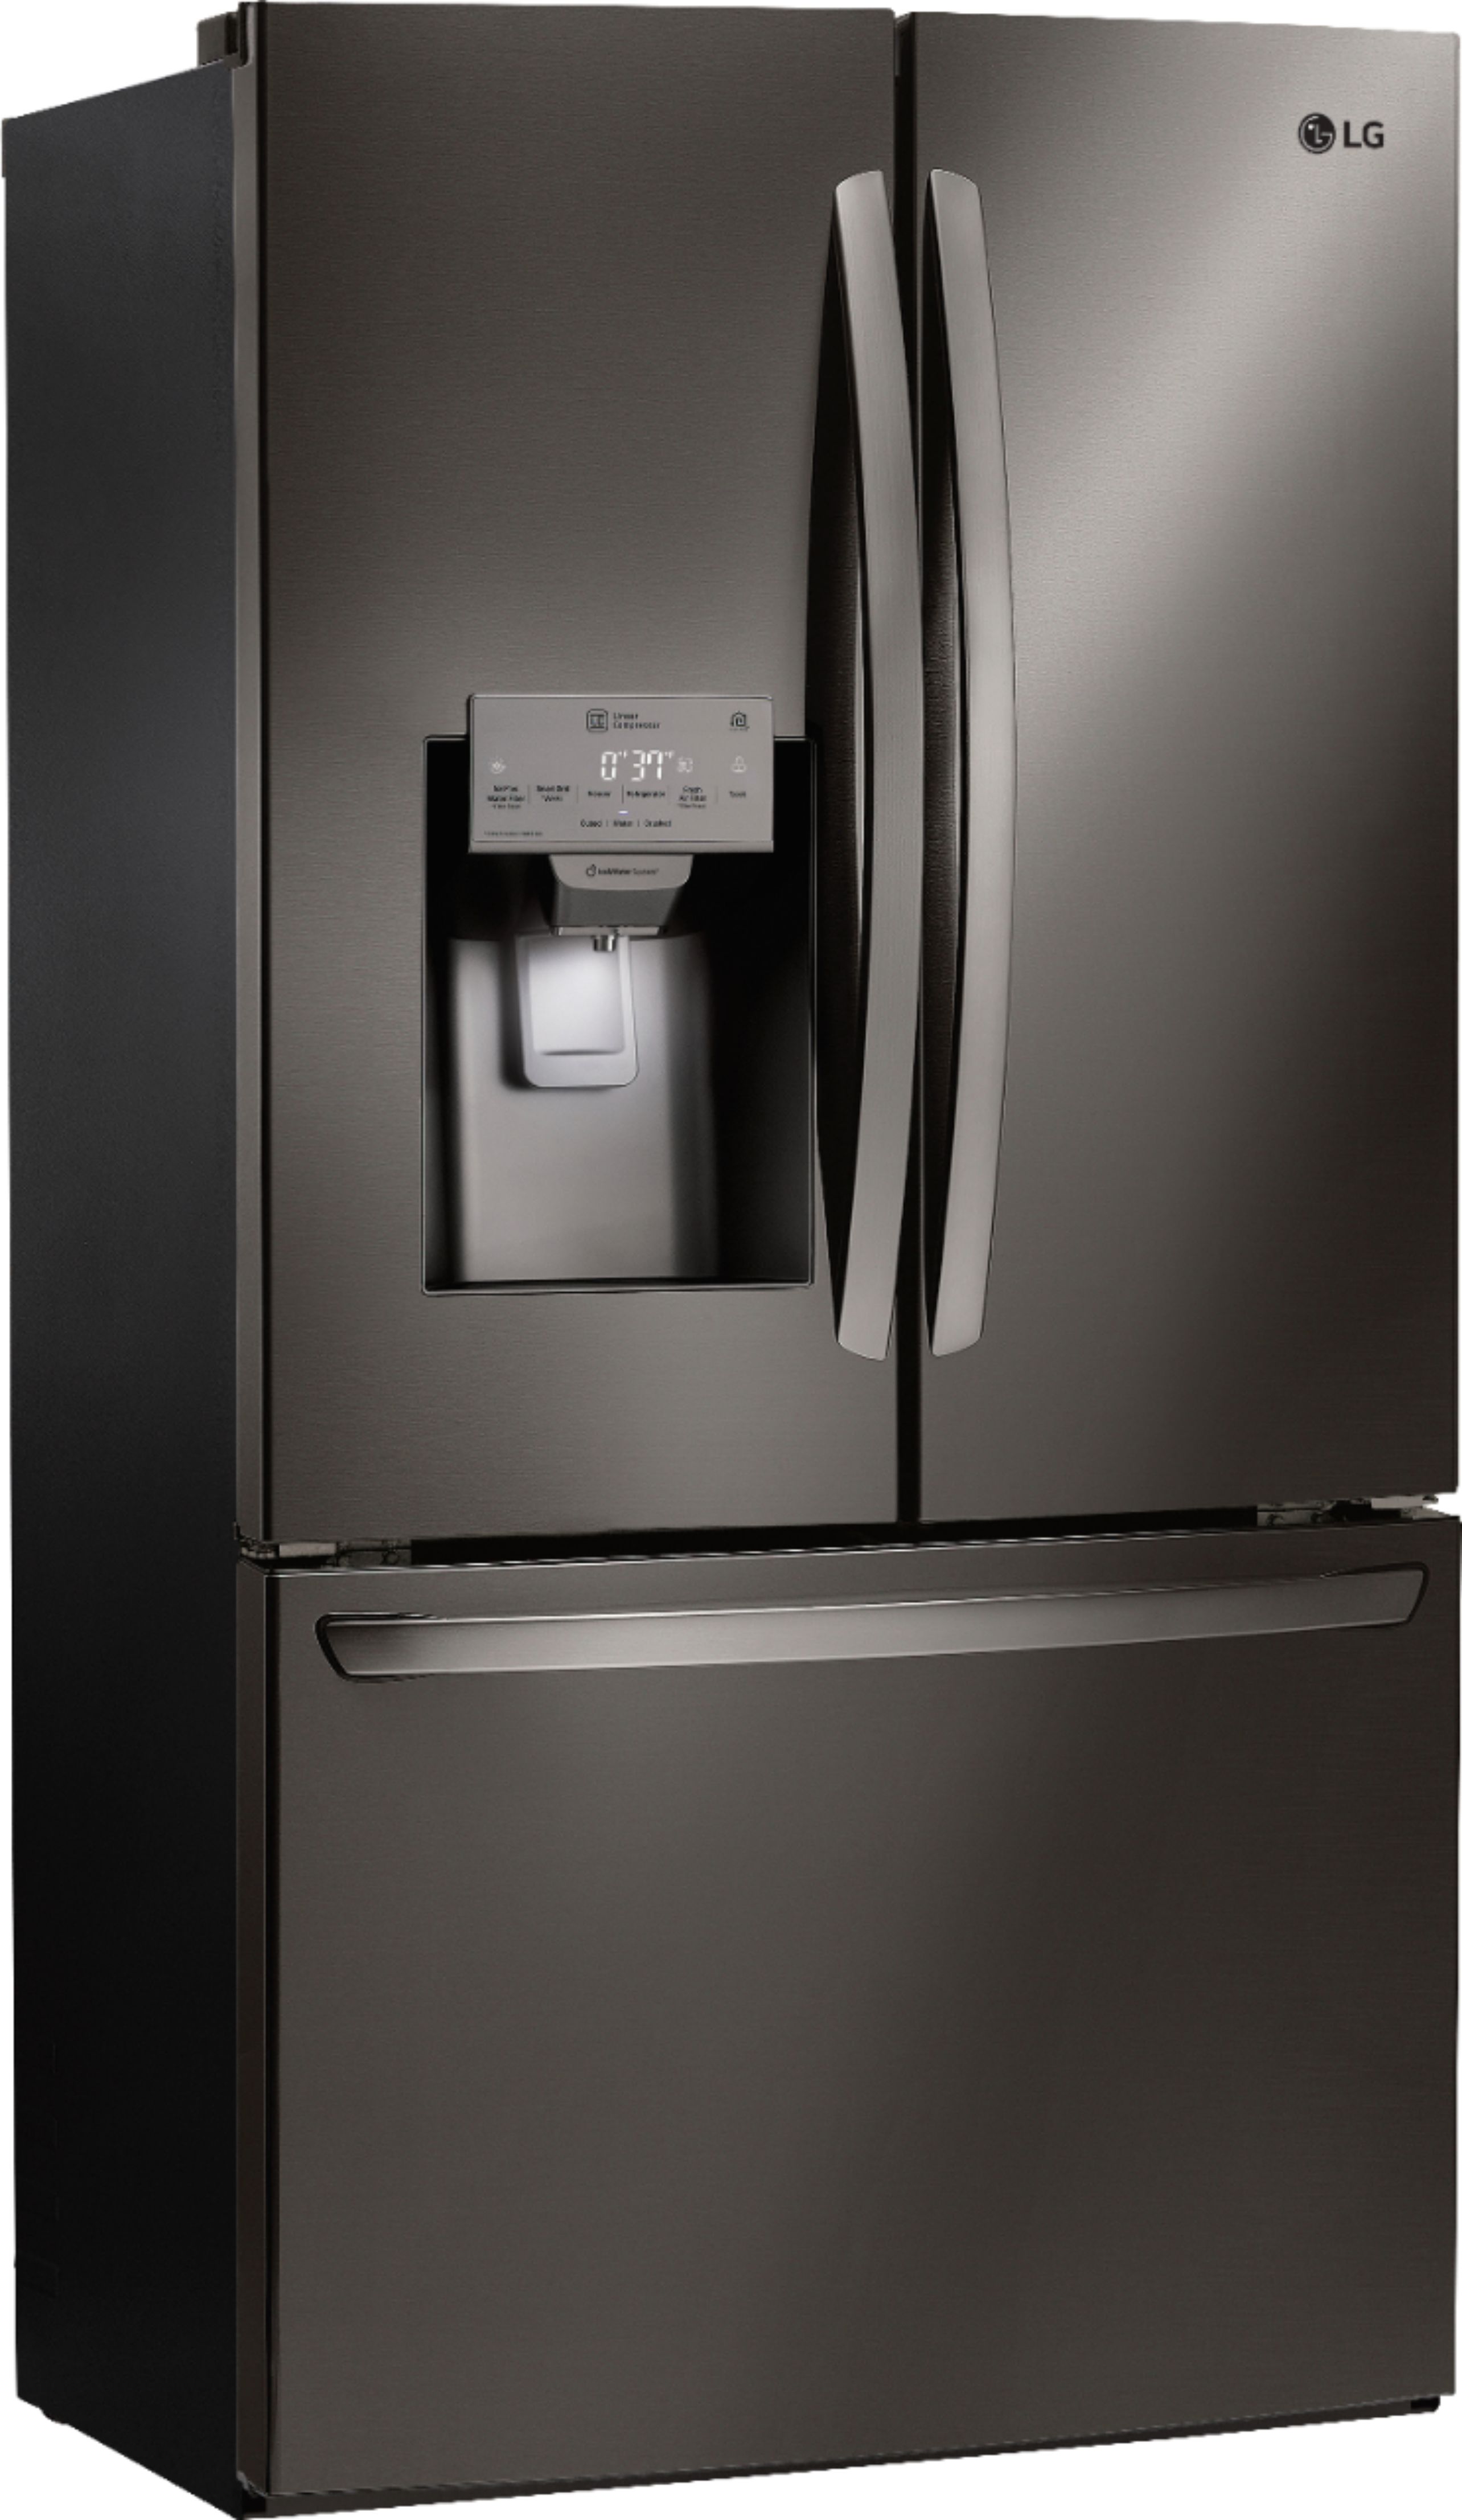 Angle View: LG - 26.2 Cu. Ft. French Door Smart Refrigerator with Dual Ice Maker - Black Stainless Steel